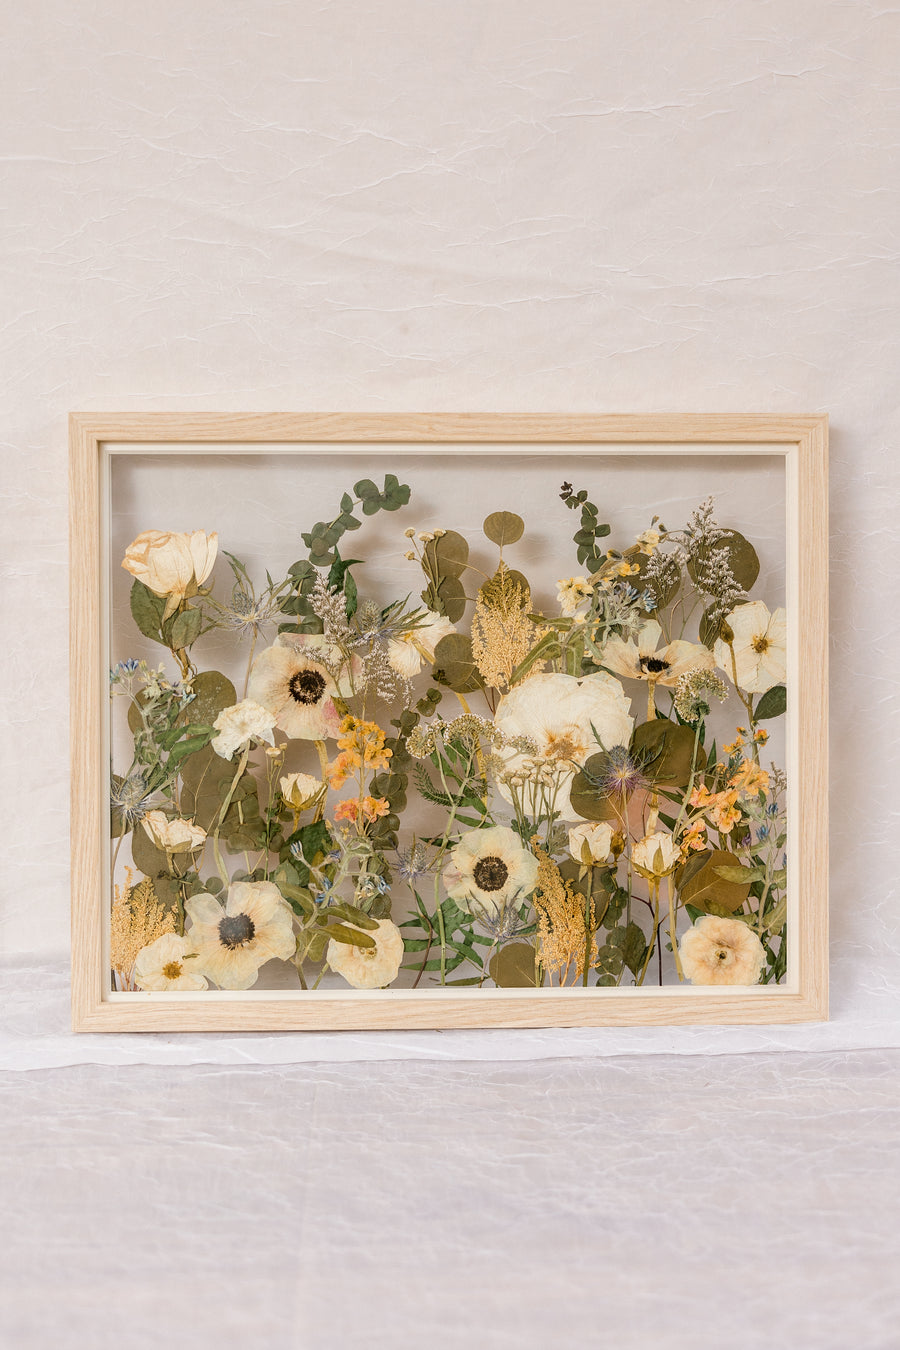 16x20 natural wood frame with pressed wedding flower horizontal field style design